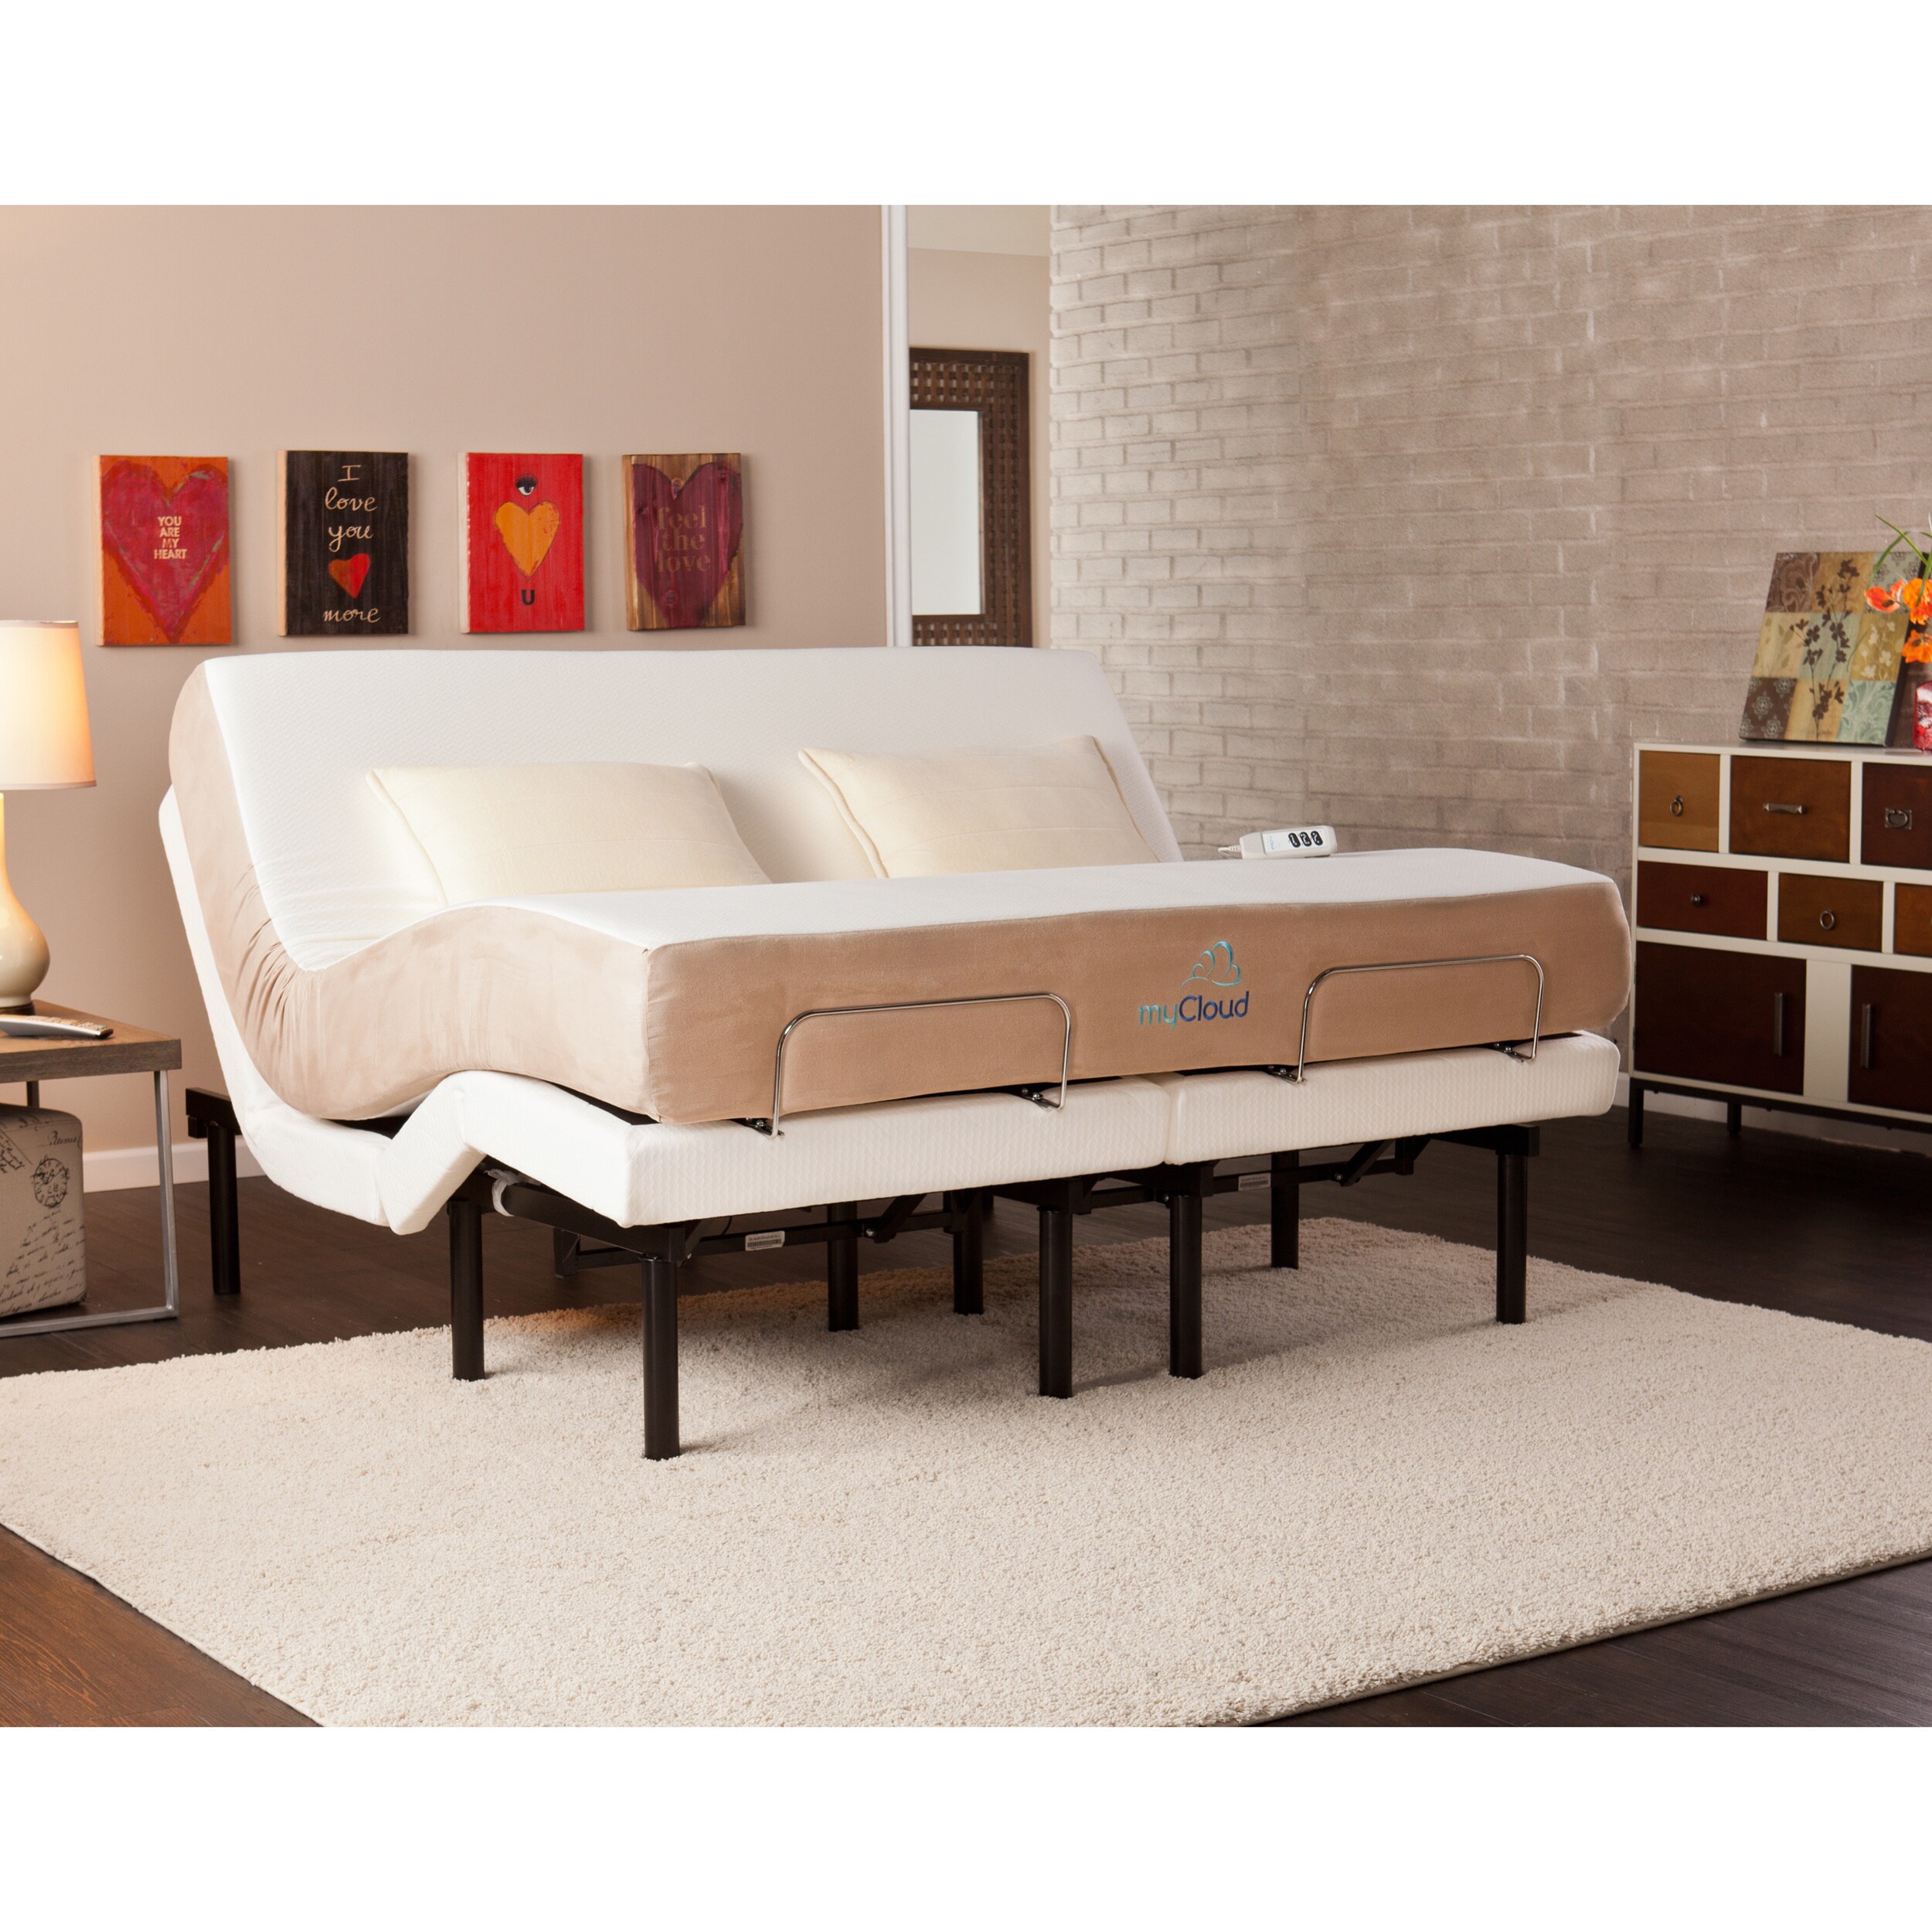 Mycloud Adjustable Bed California King size With 10 inch Gel Infused Memory Foam Mattress